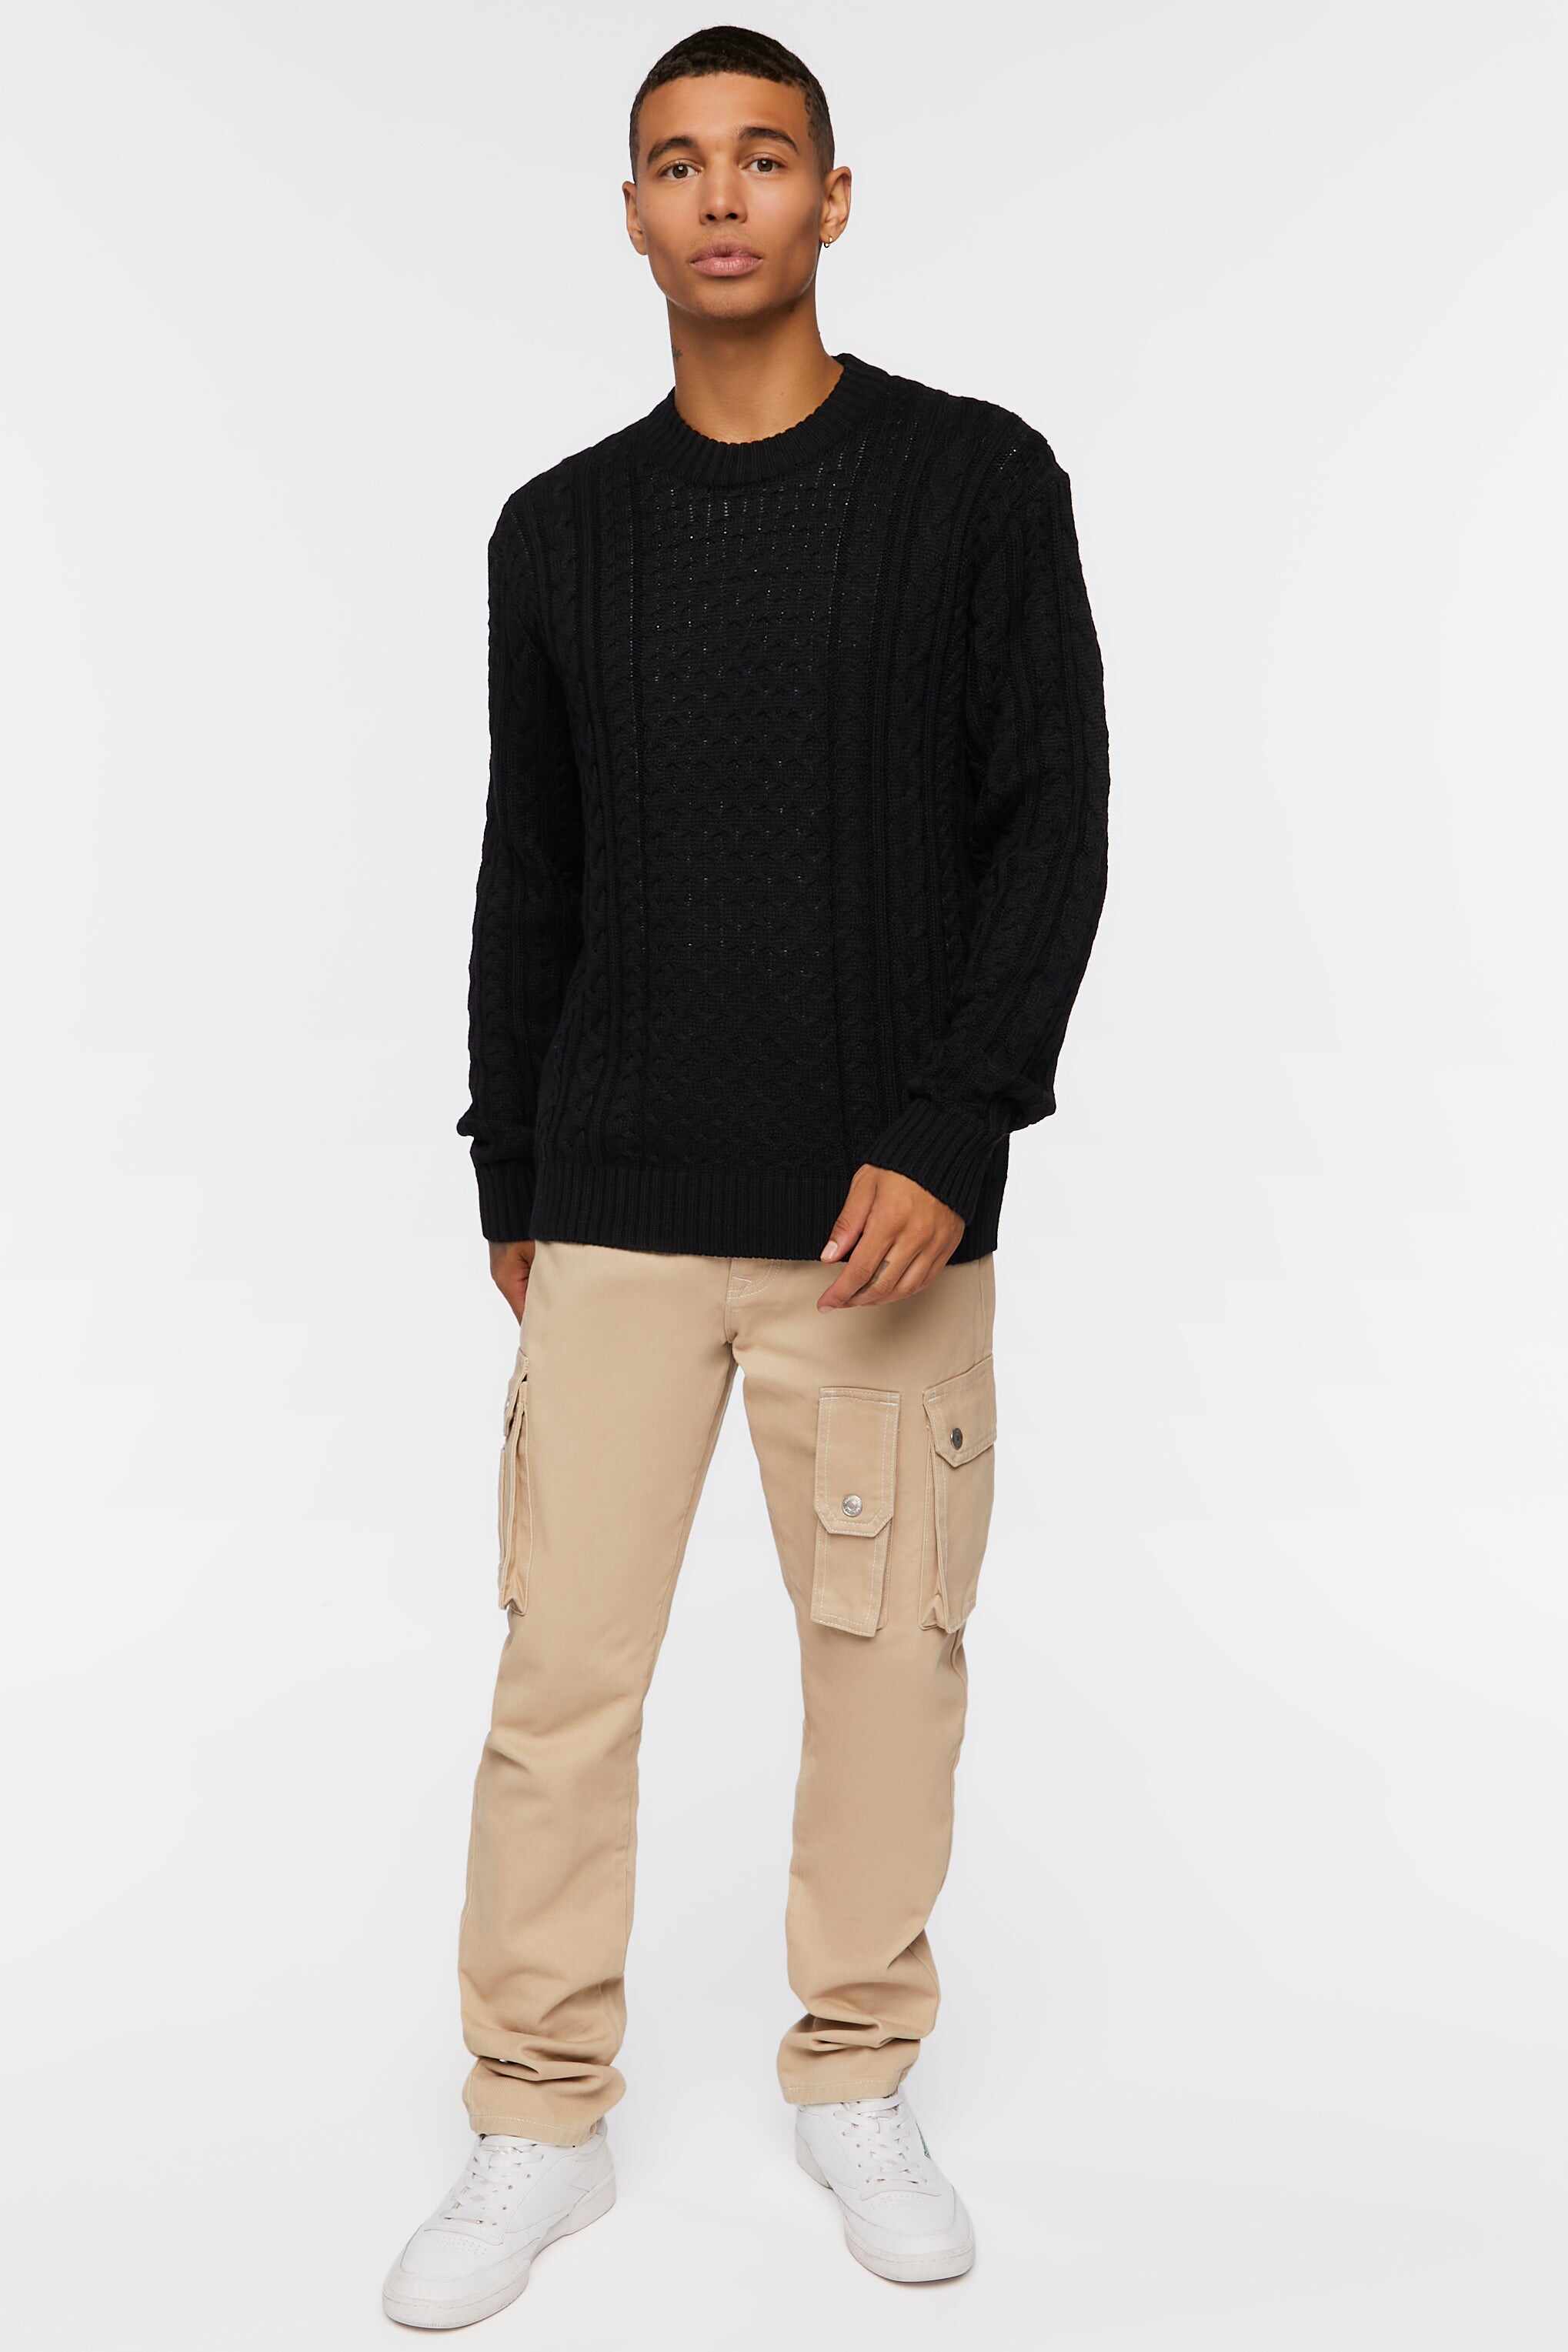 Men Apparel | Cable Knit Crew Sweater Cream Forever21 - OR12713